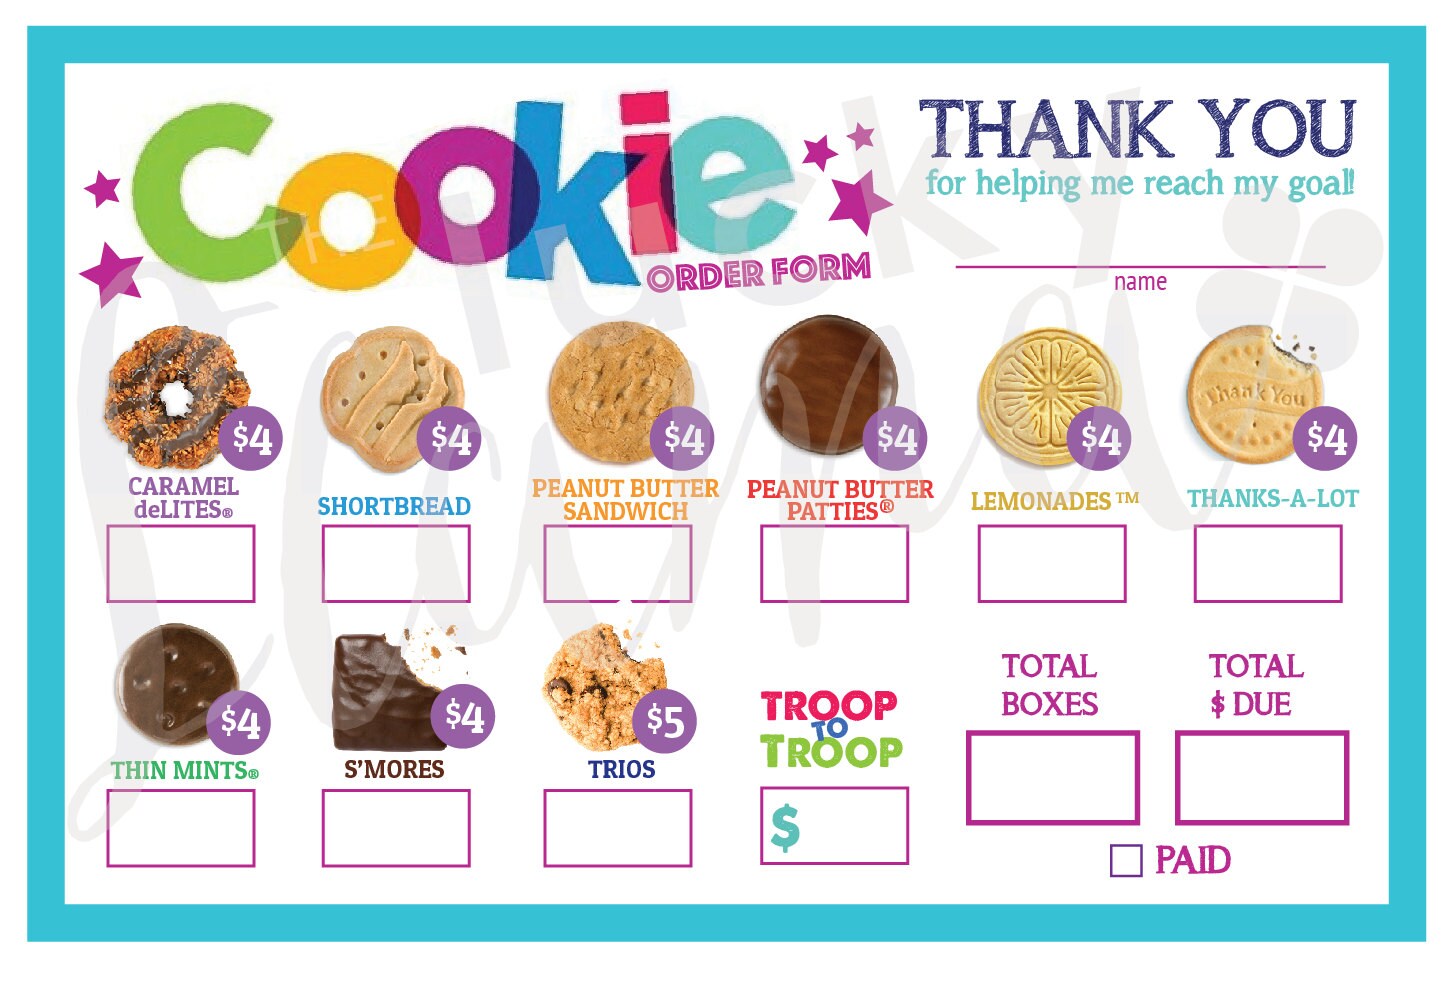 Girl Scout Cookie Order Form Blank Printable